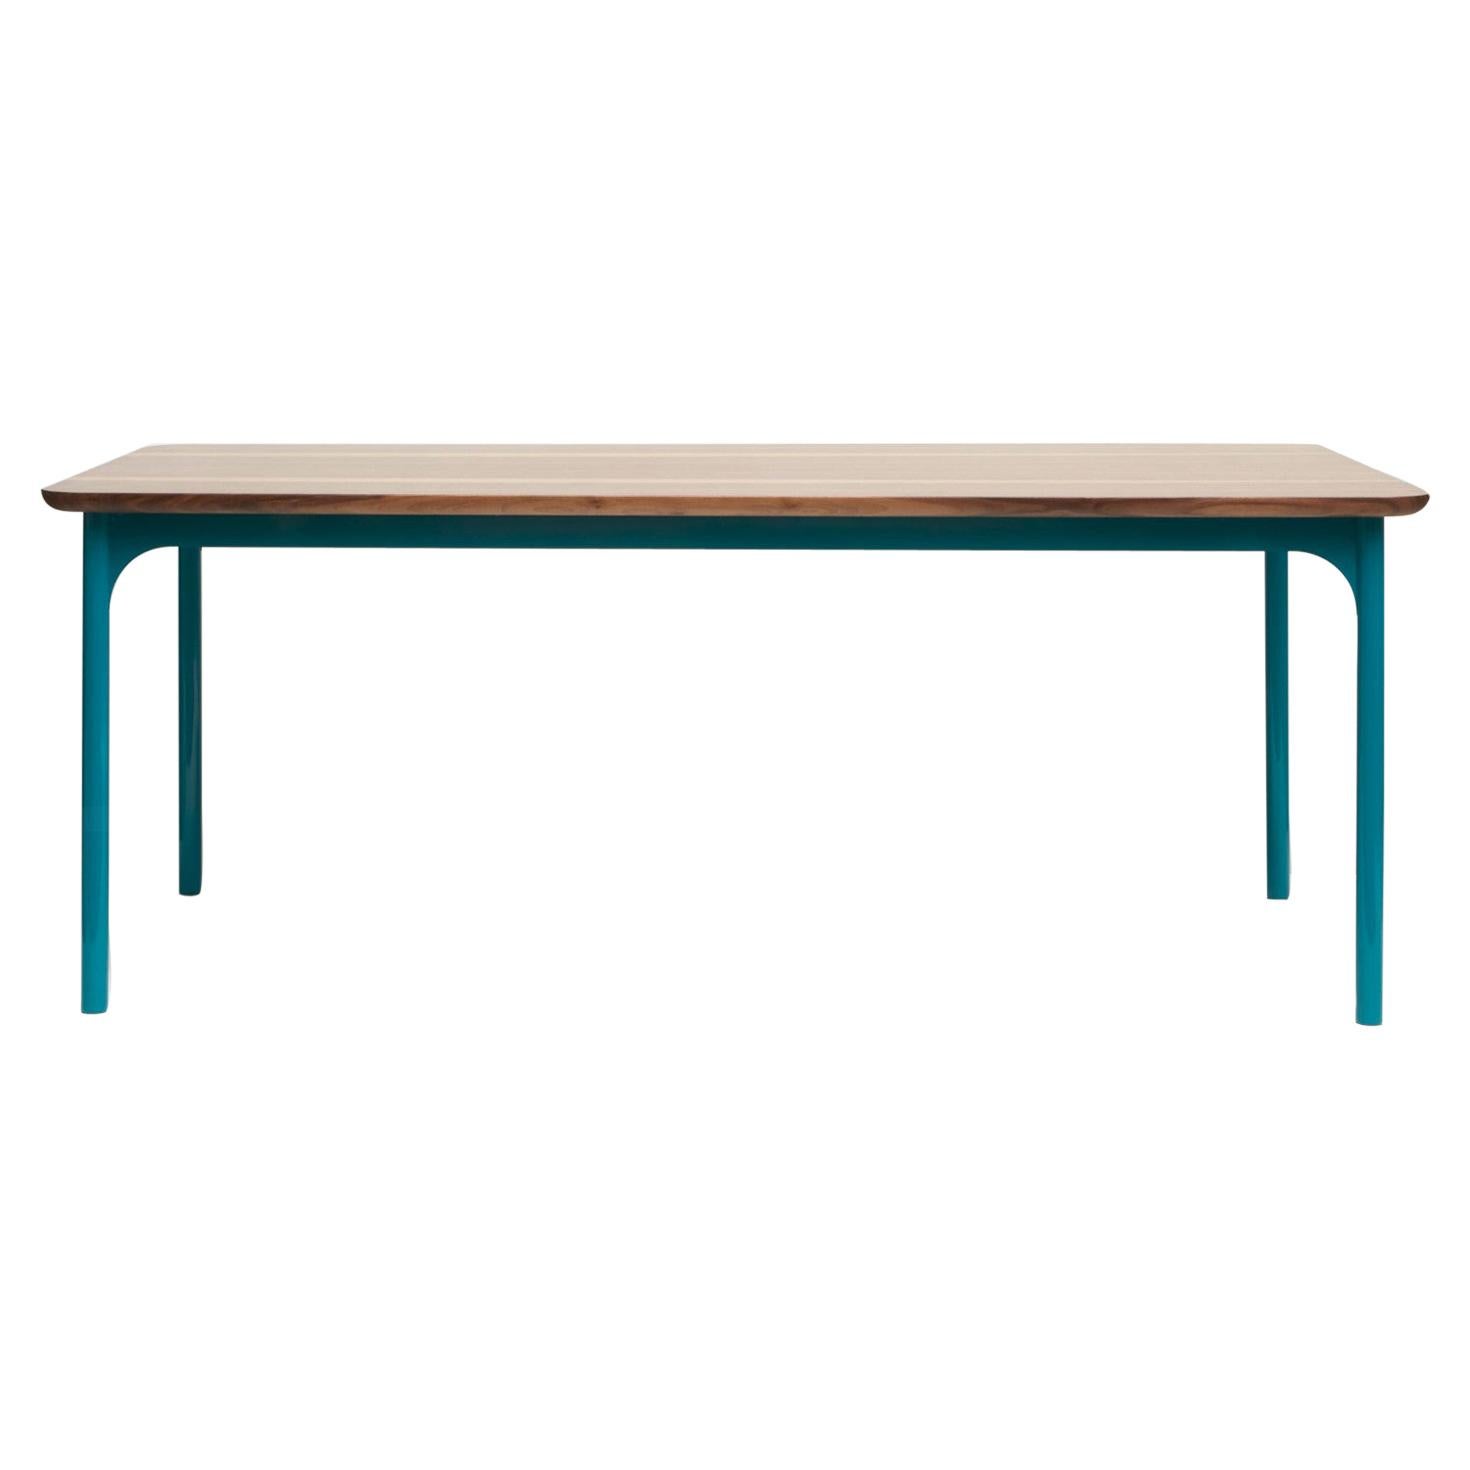 21st Century Matteo Zorzenoni Dining Table Metal Structure Wood Fillet M Scapin For Sale